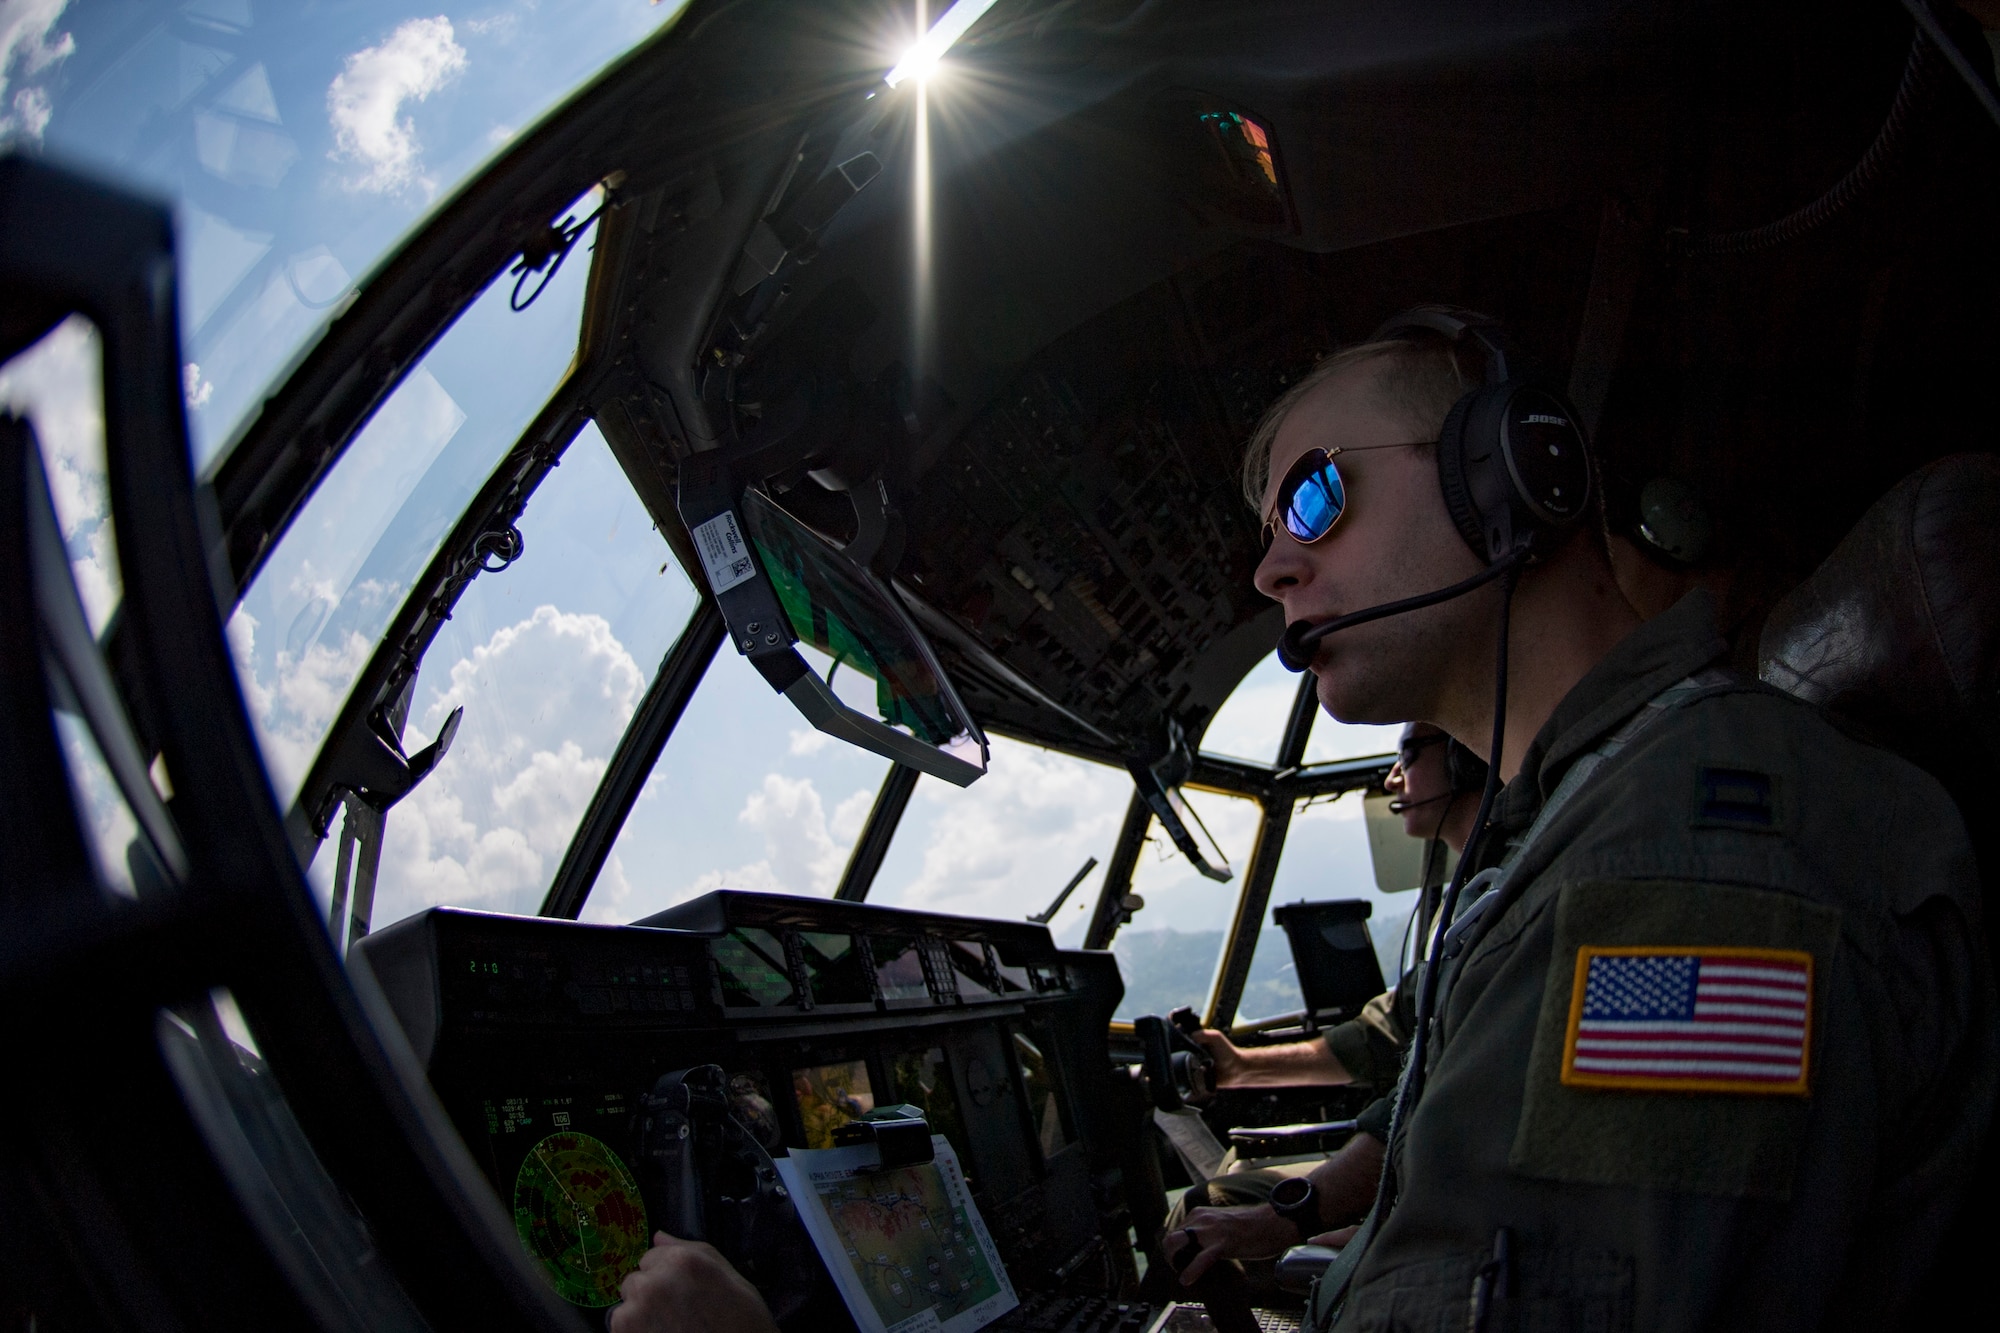 U.S. Air Force Capt. Bryant Bailey, 37th Airlift Squadron pilot, flies a C-130J Super Hercules aircraft over Romania with Lt. Col. Alex Miller, 37th AS director of operations, Aug. 21, 2018. Bailey and Miller flew low-level routes as part of exercise Carpathian Summer 2018. (U.S. Air Force photo by Senior Airman Devin Boyer)